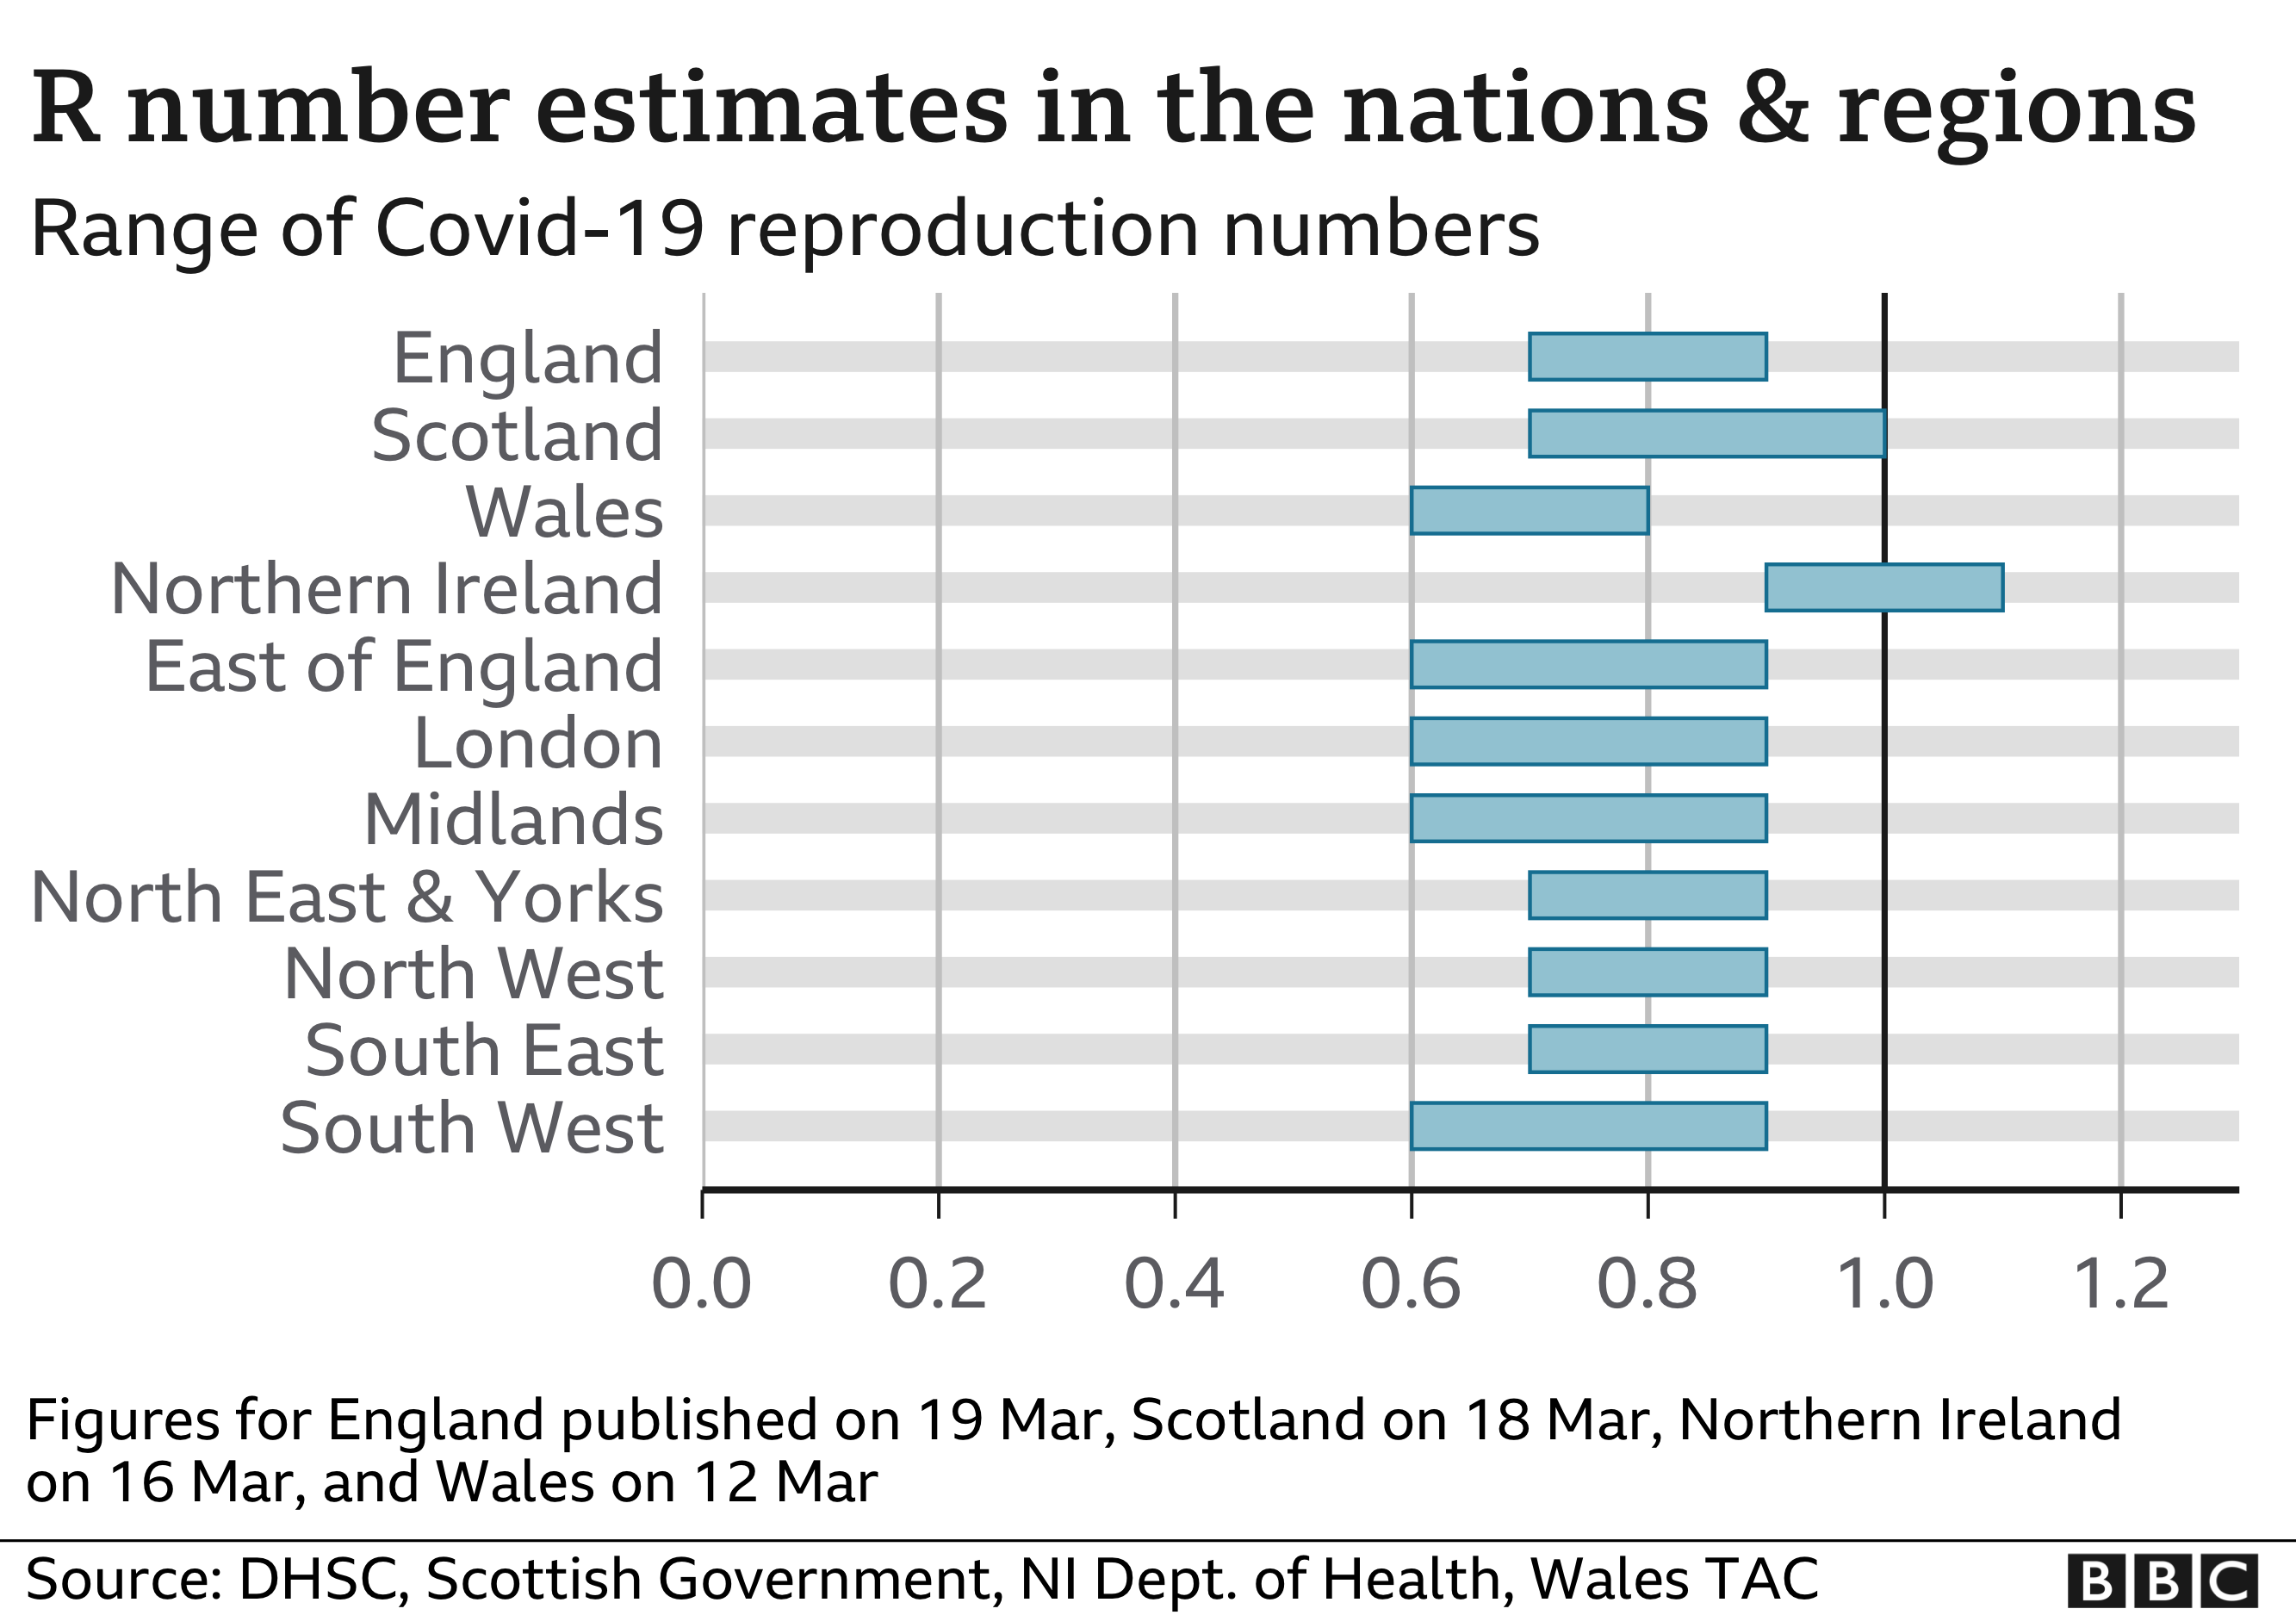 R number estimates in the nations and regions 19 March